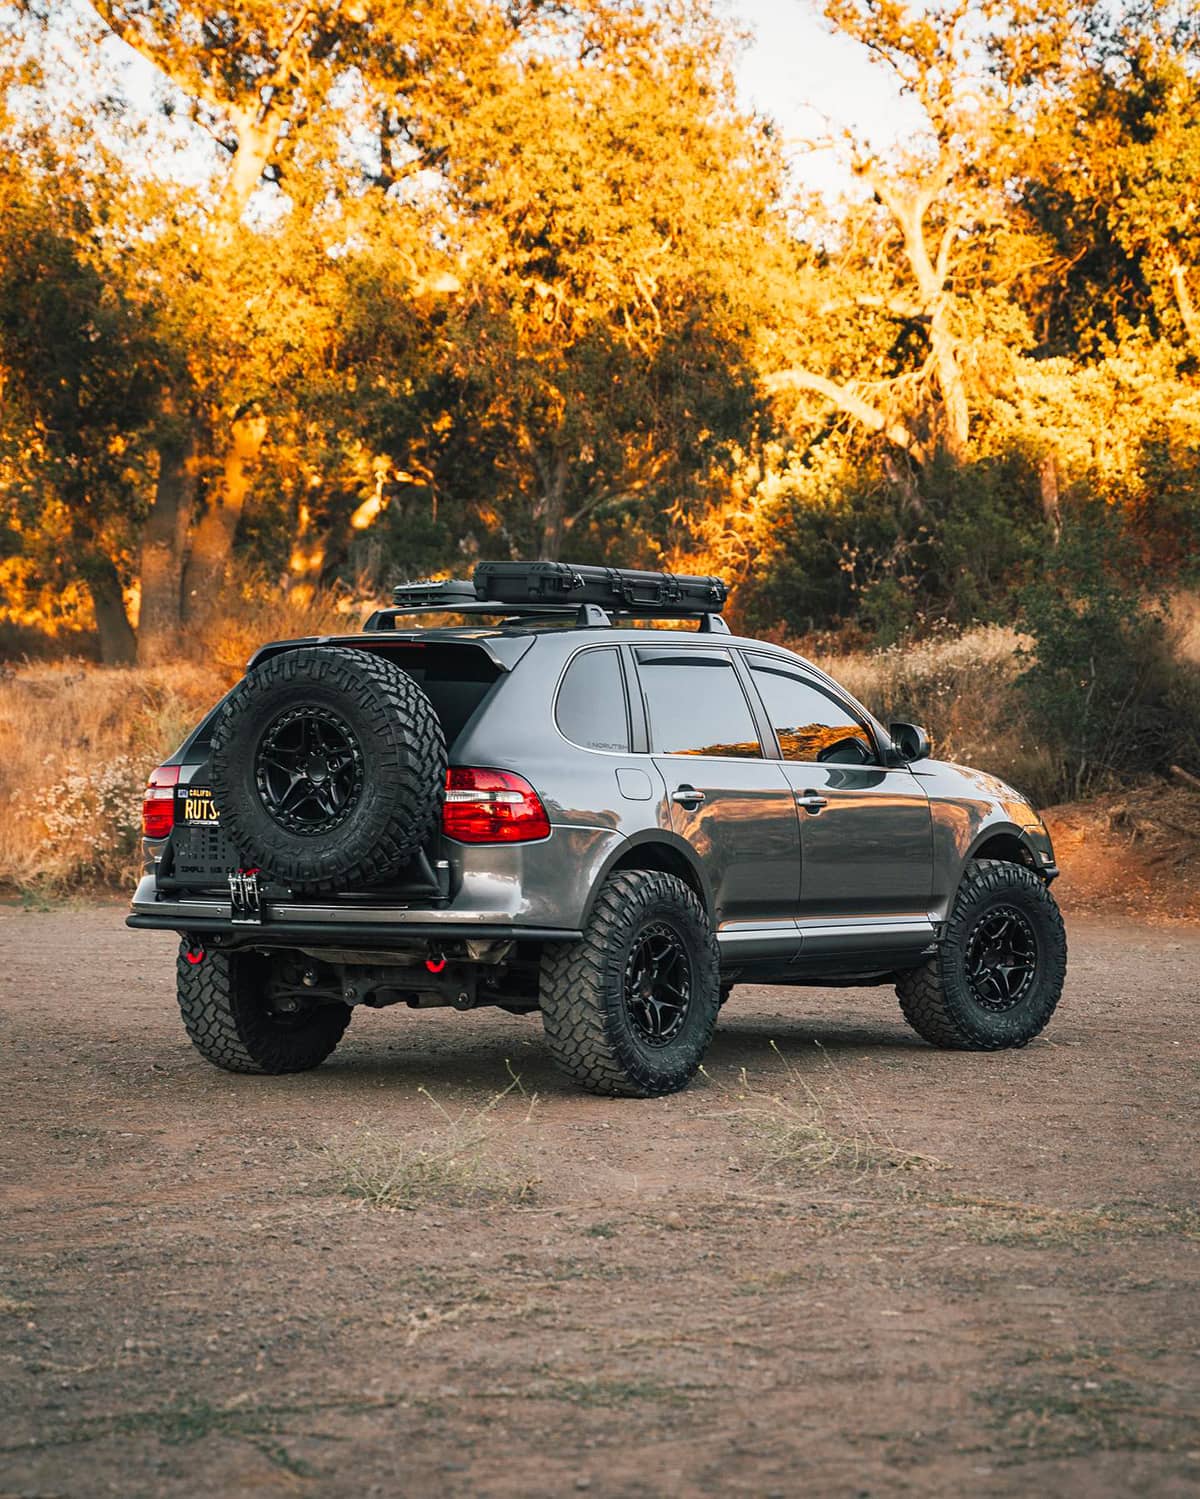 Lifted Porsche Cayenne 957 overland off-road build on 35 inch tires and pre-runner style bumpers